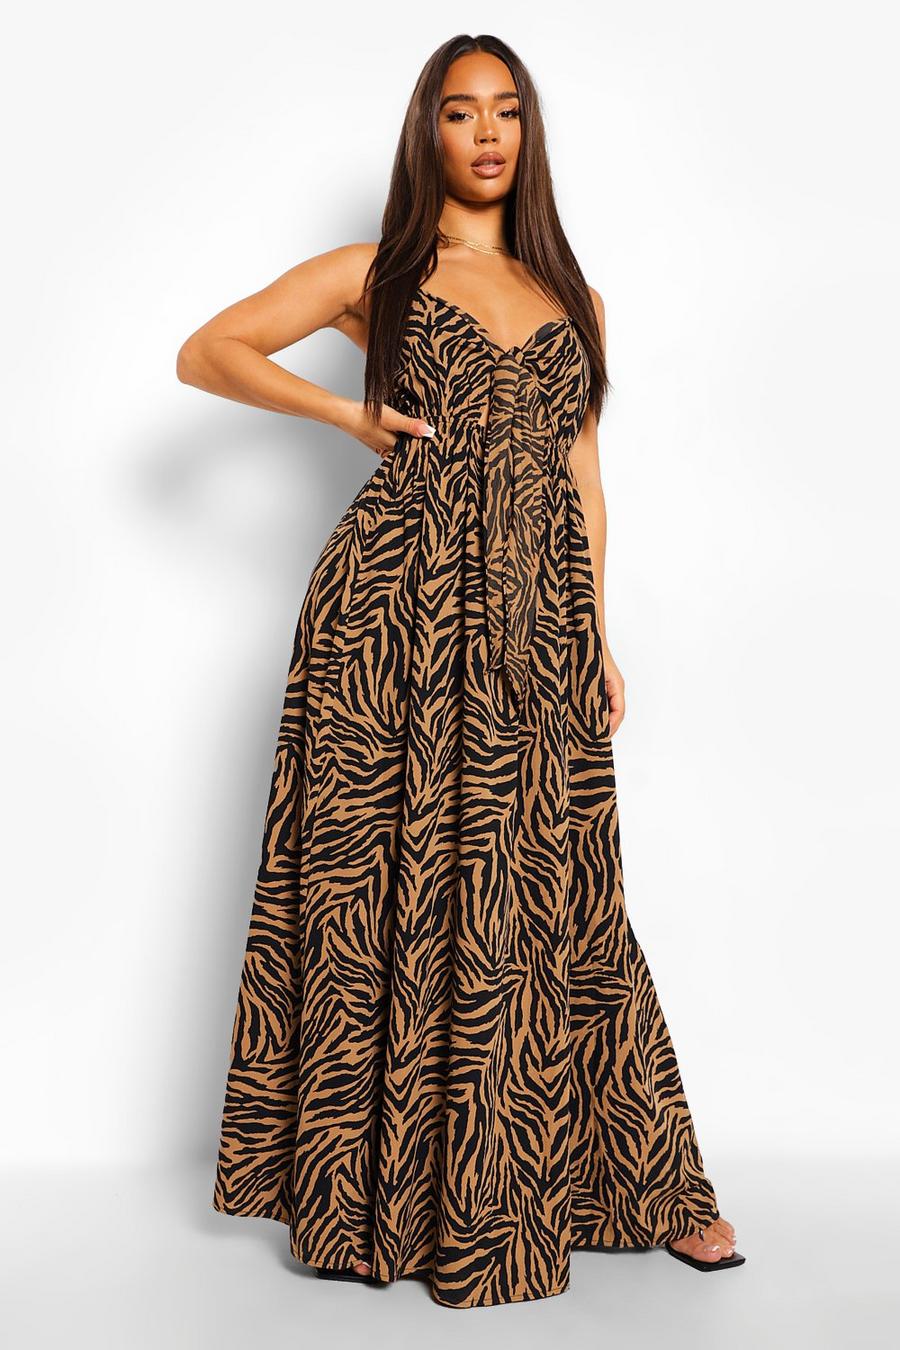 Countryside få Hovedkvarter Women's Animal Print Tie Bust Cut Out Maxi Dress | Boohoo UK